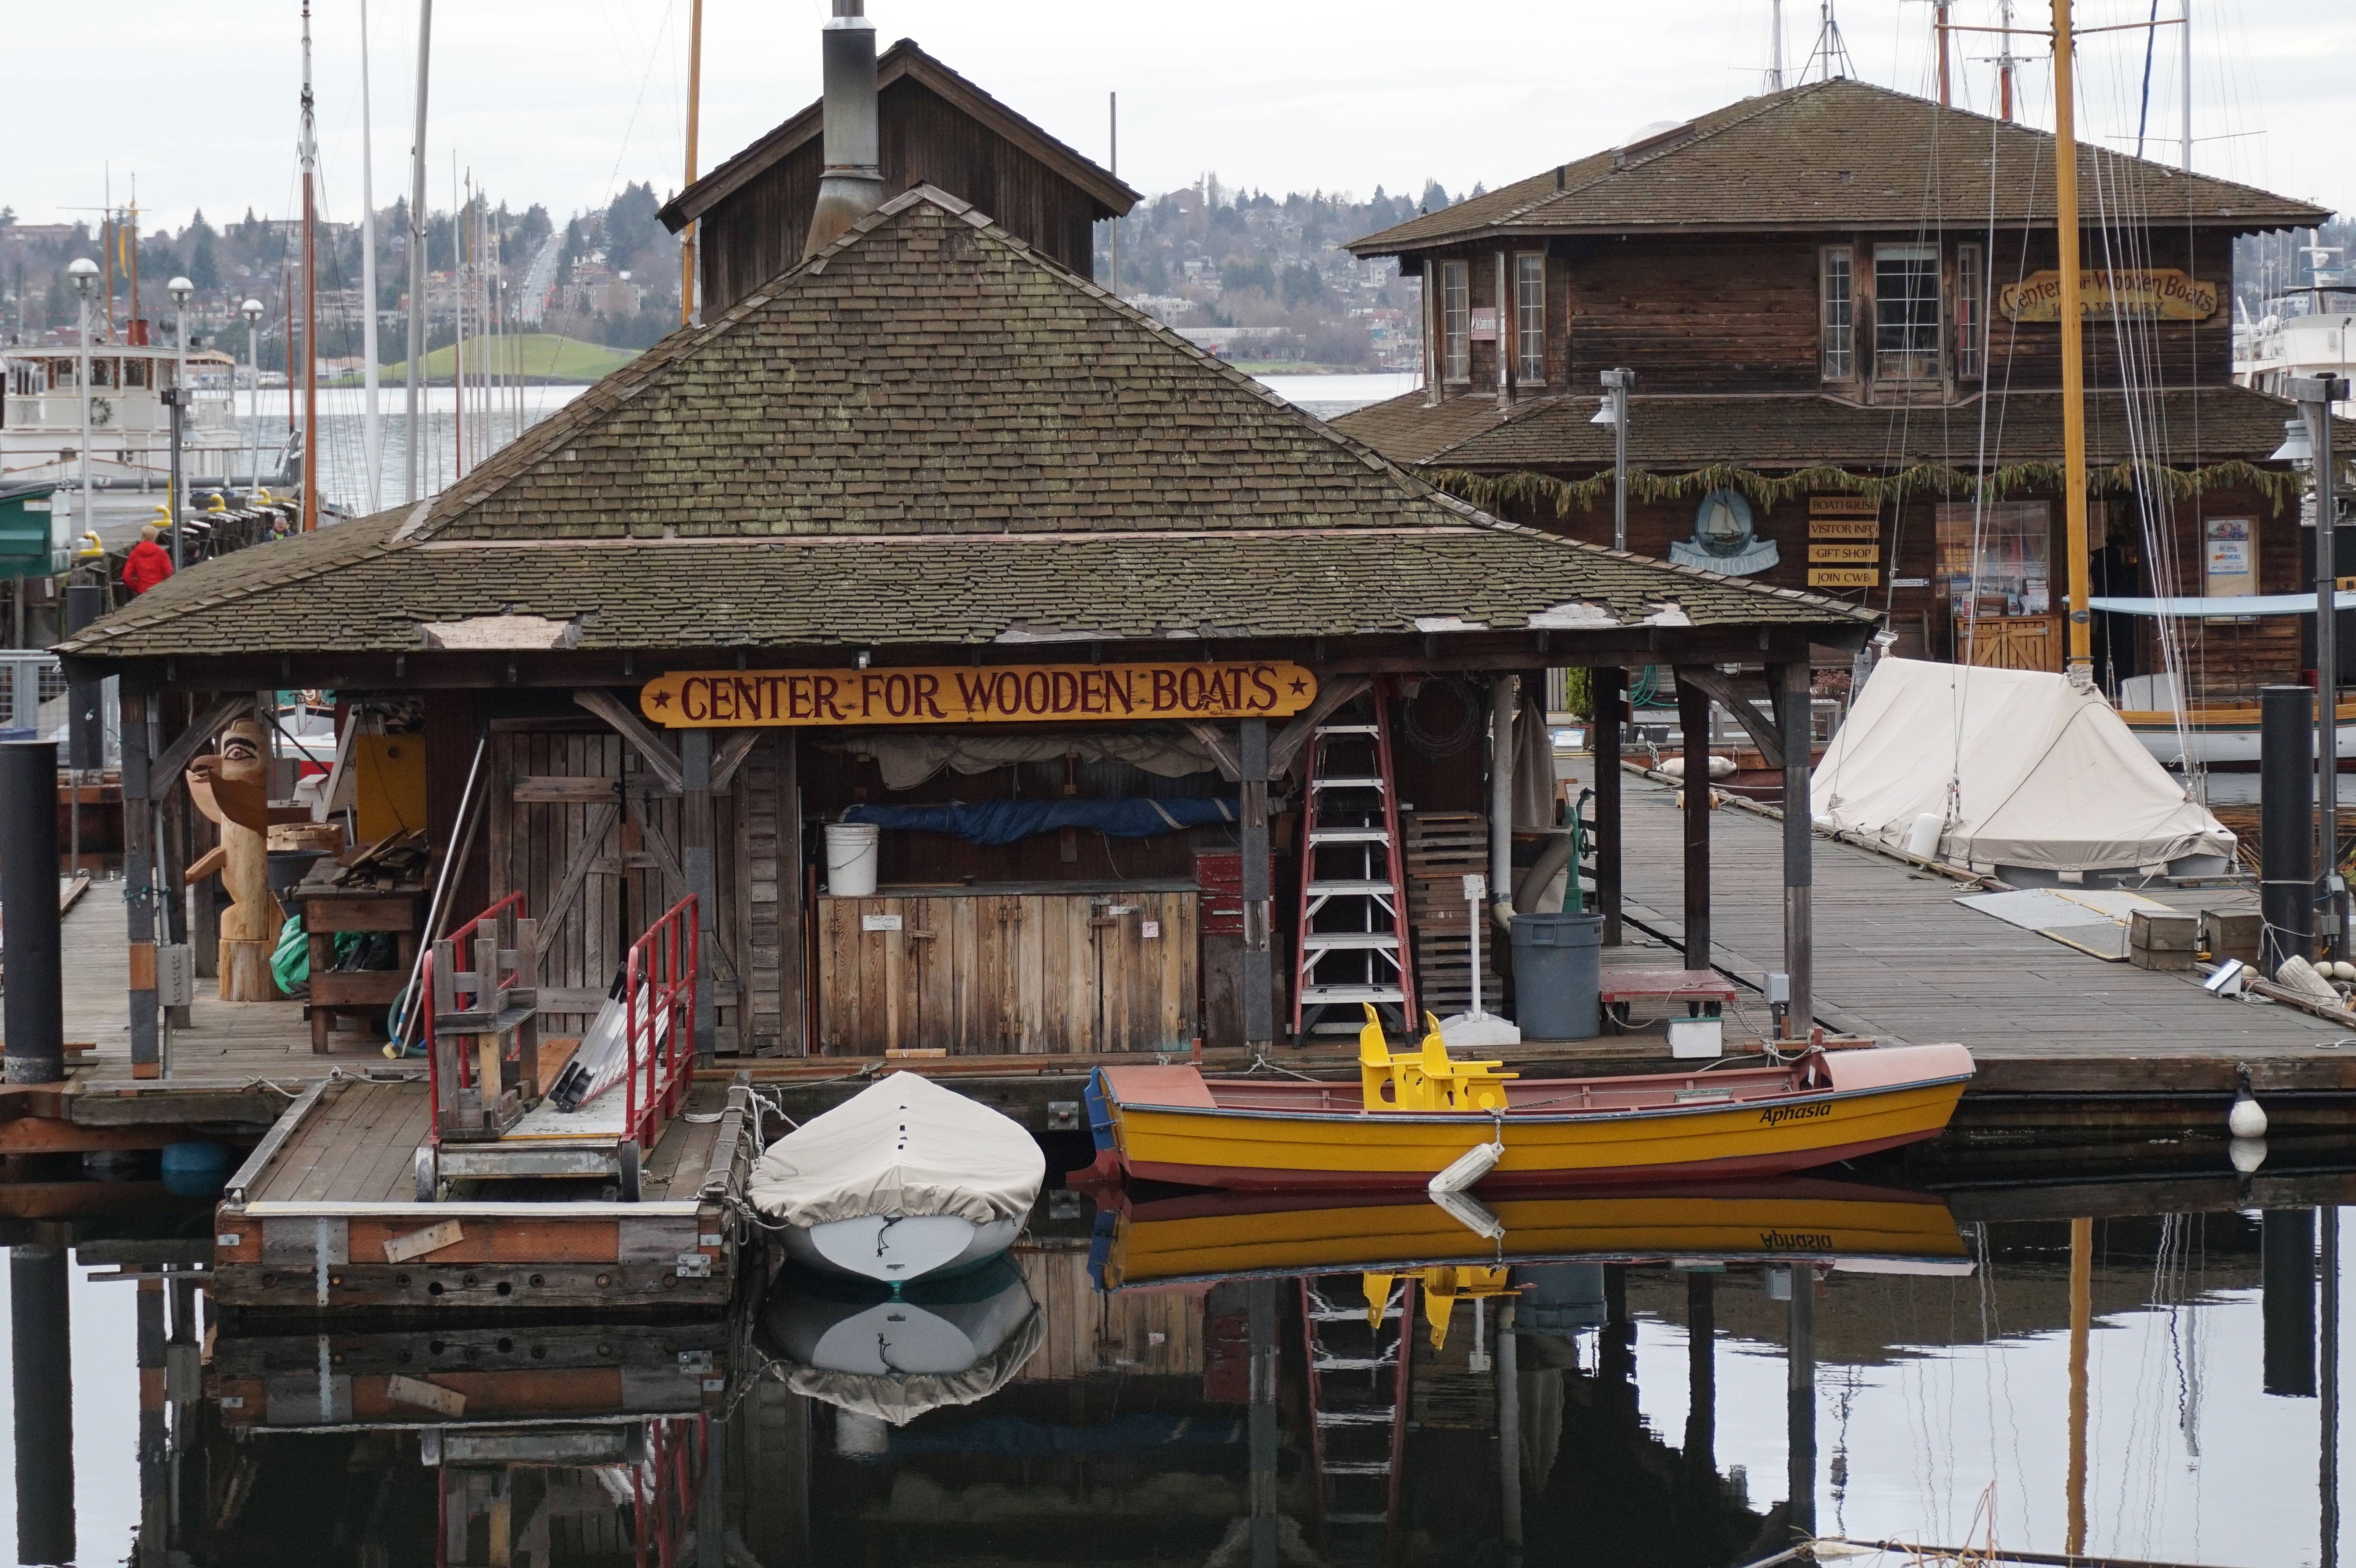 Seattle’s Center for Wooden Boats rents watercraft for exploring Lake Union and maintains a collection of maritime history artifacts. Image by Brendan Sainsbury / Lonely Planet